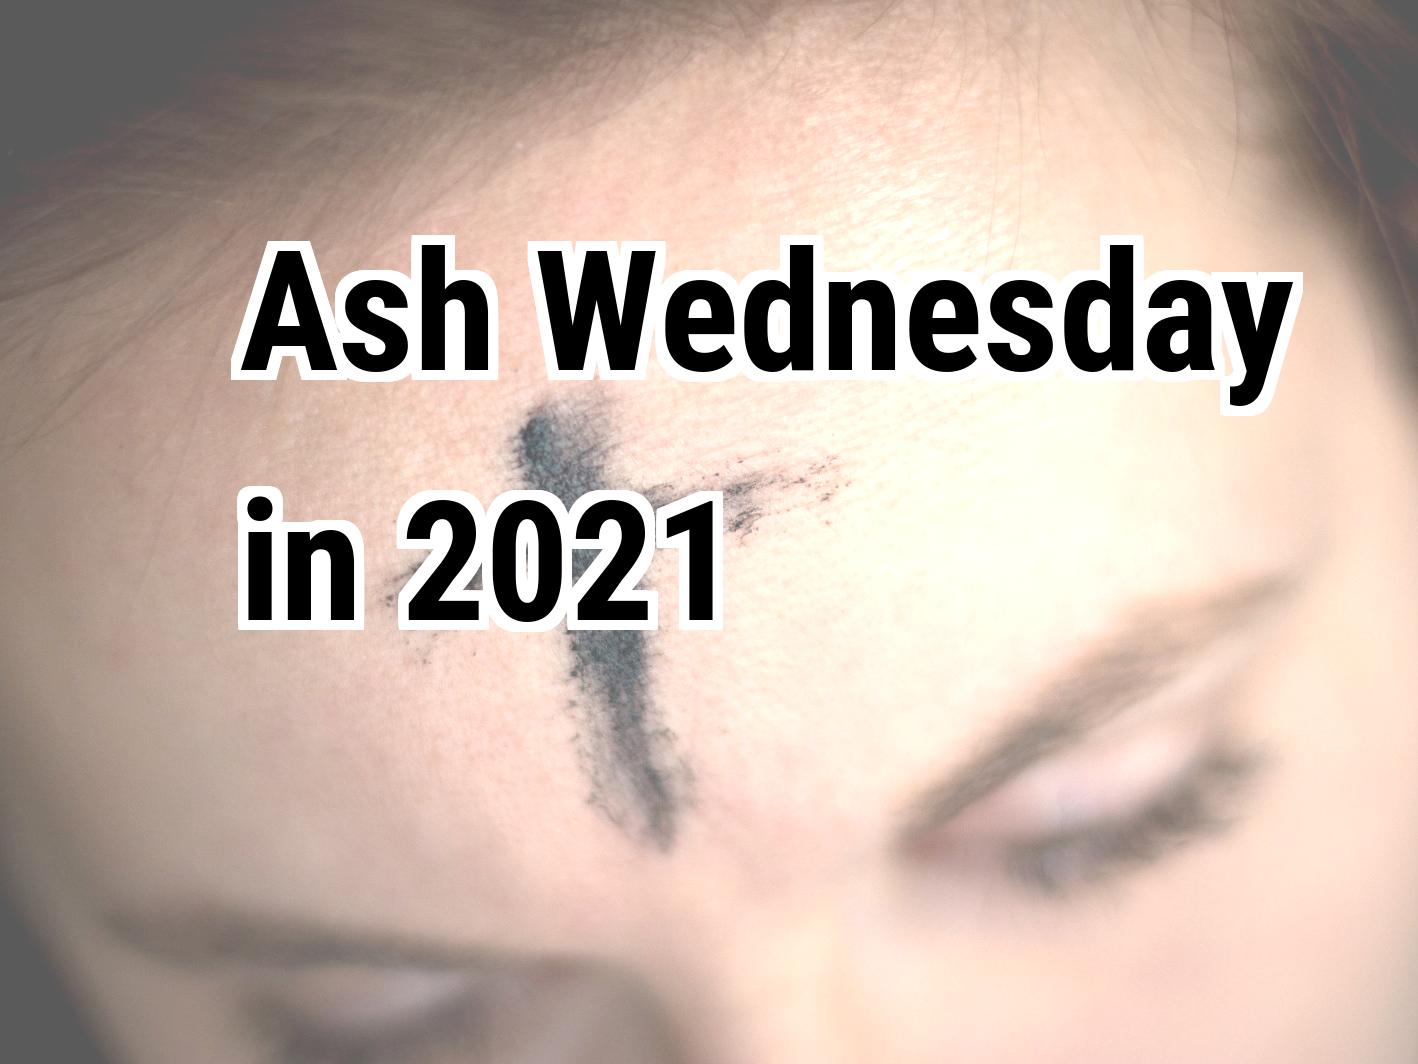 Ash Wednesday 2021. When is Ash Wednesday in 2021